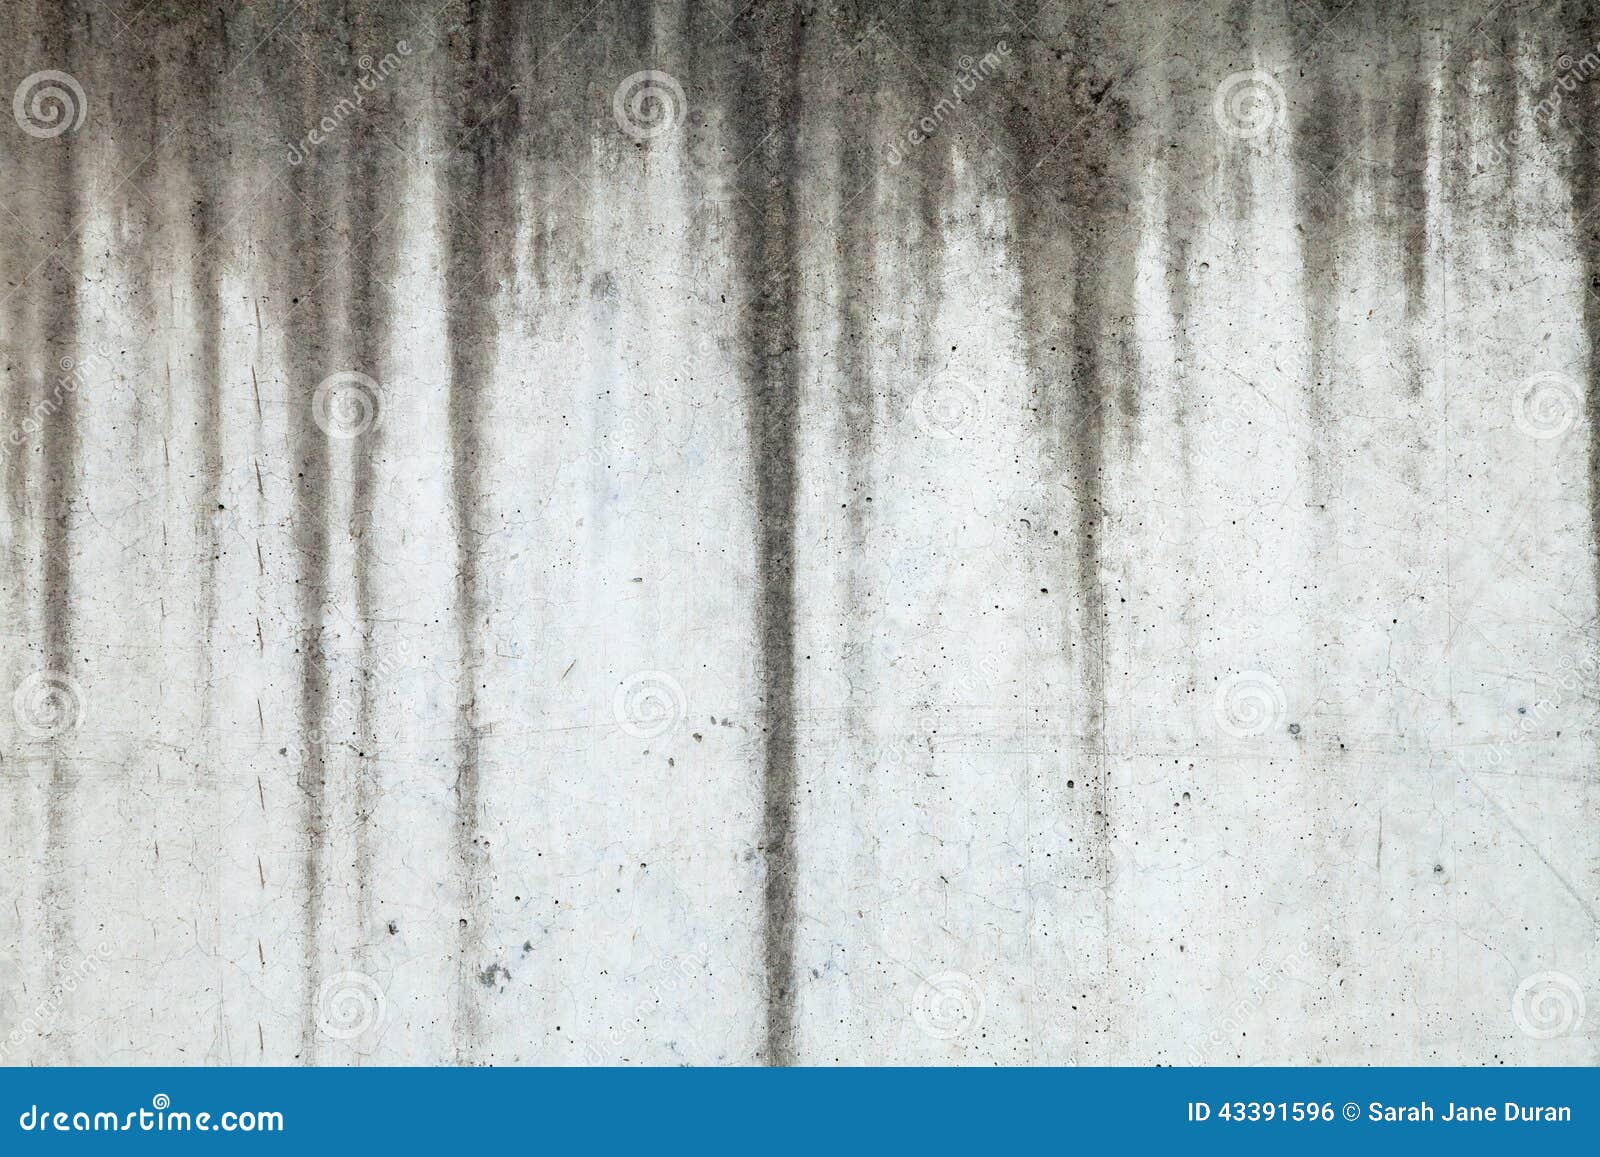 Texture Of Concrete Wall With Water Marks Running Down Stock Photo